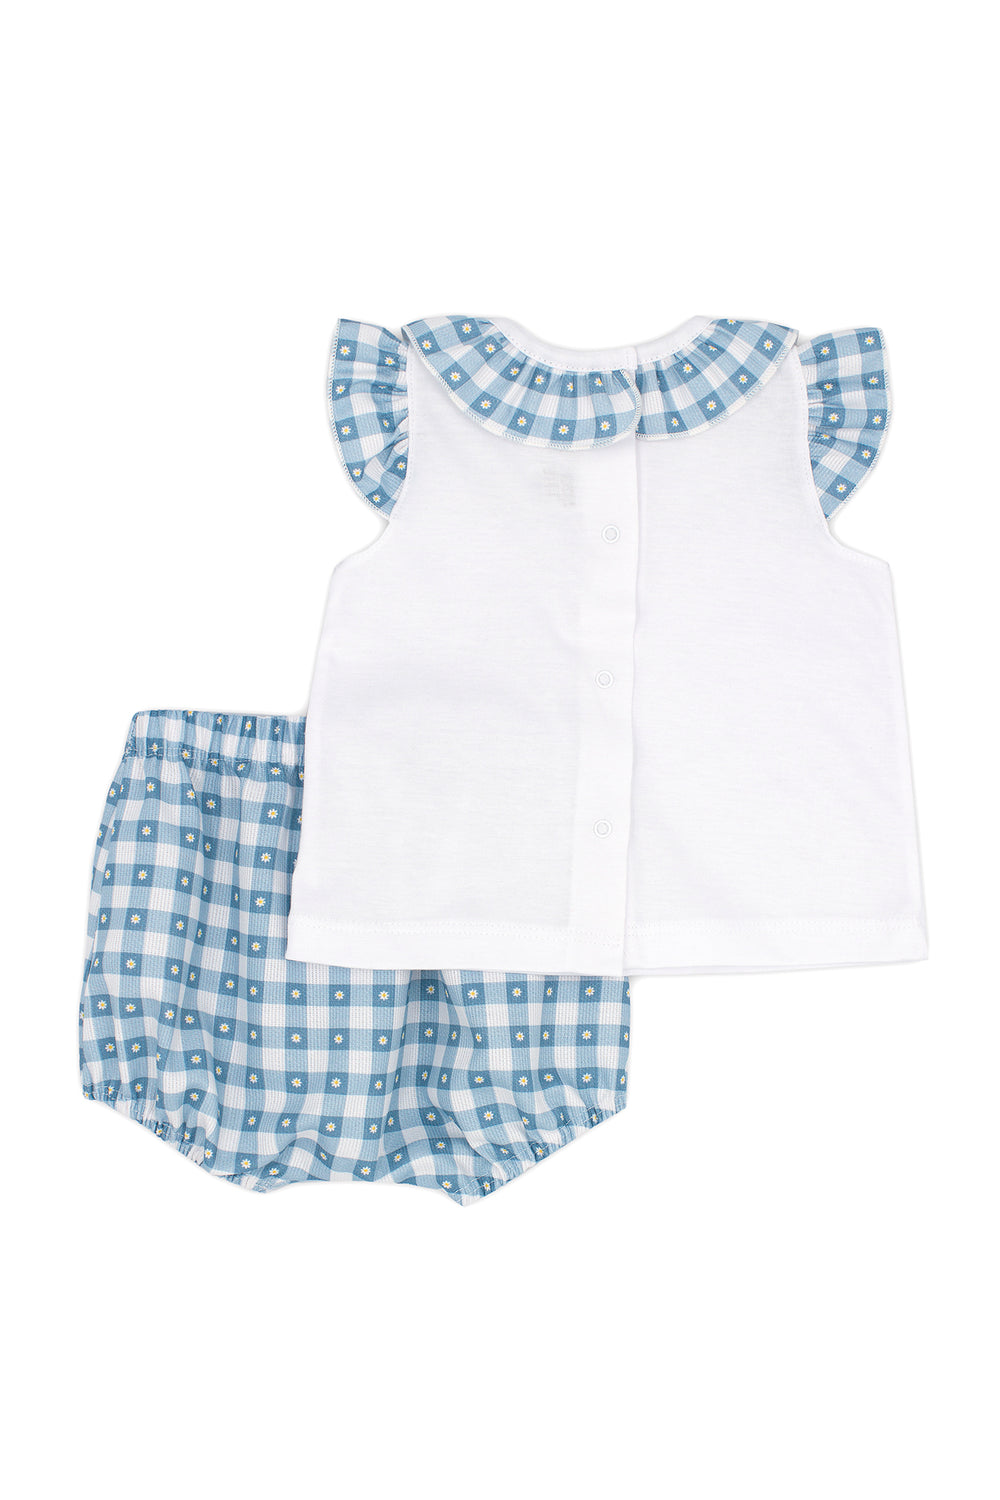 Rapife "Danica" Teal Gingham Top & Bloomers | Millie and John